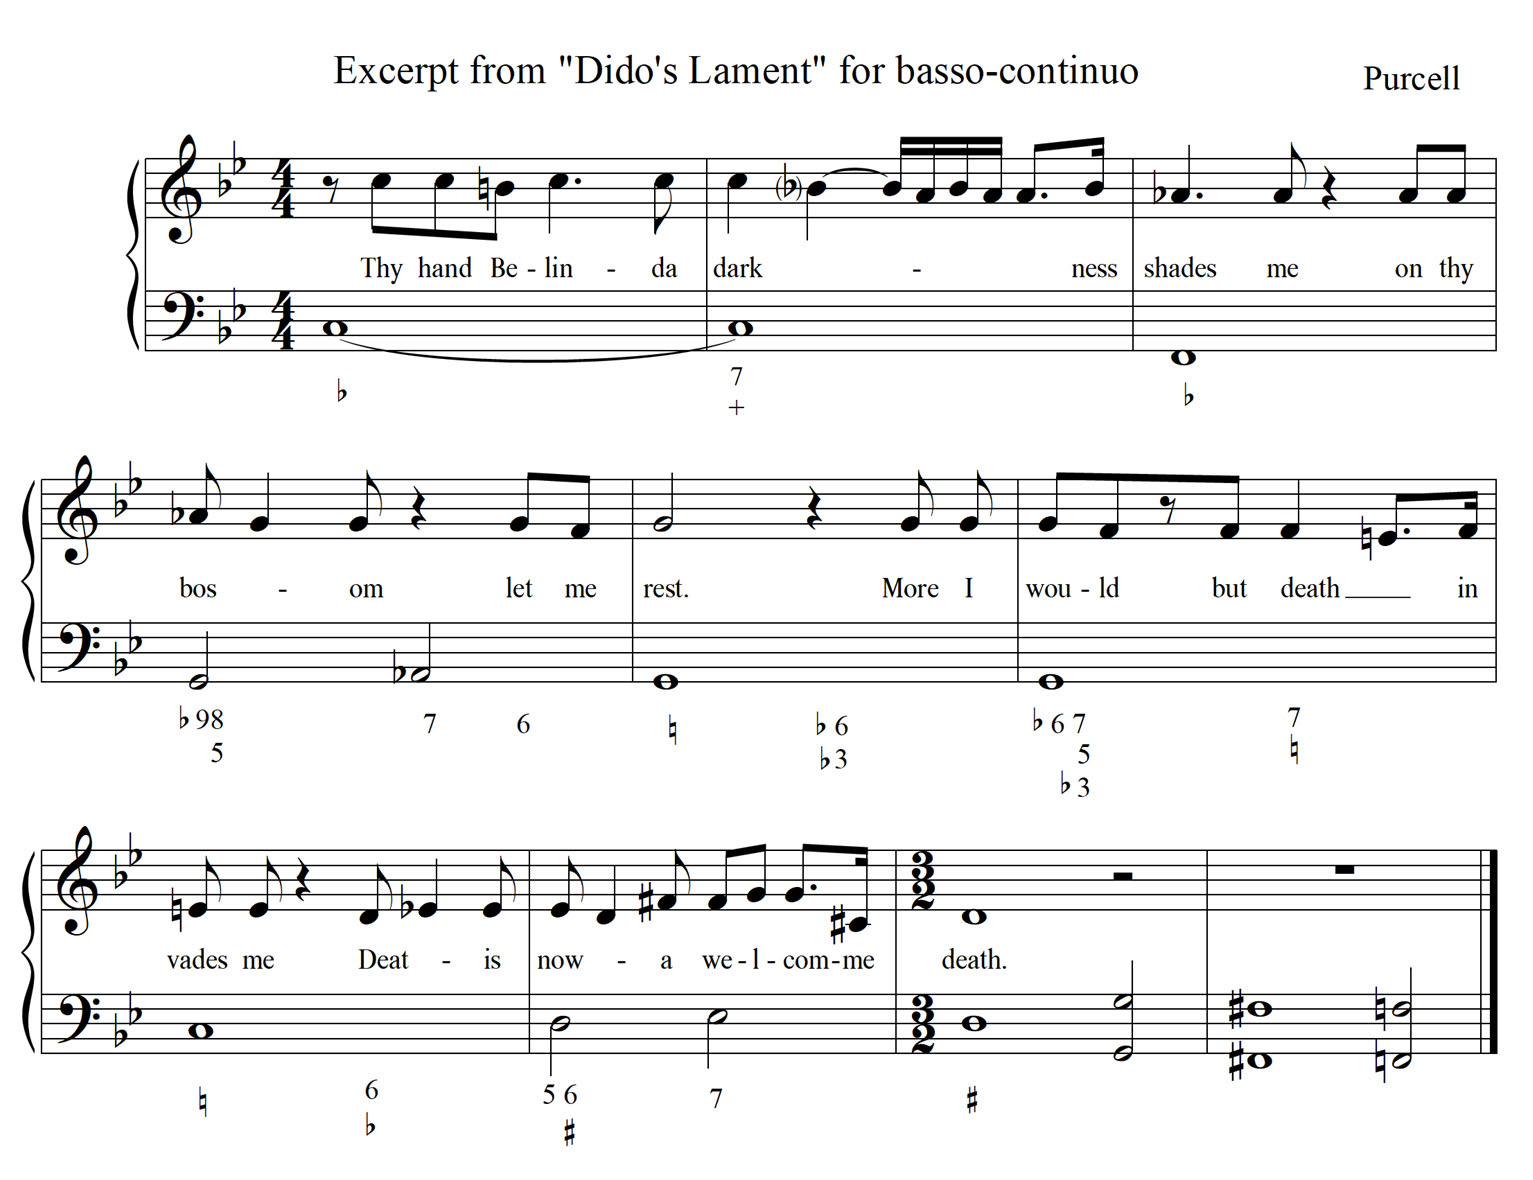 musical notes from dido's lament for basso-continuo